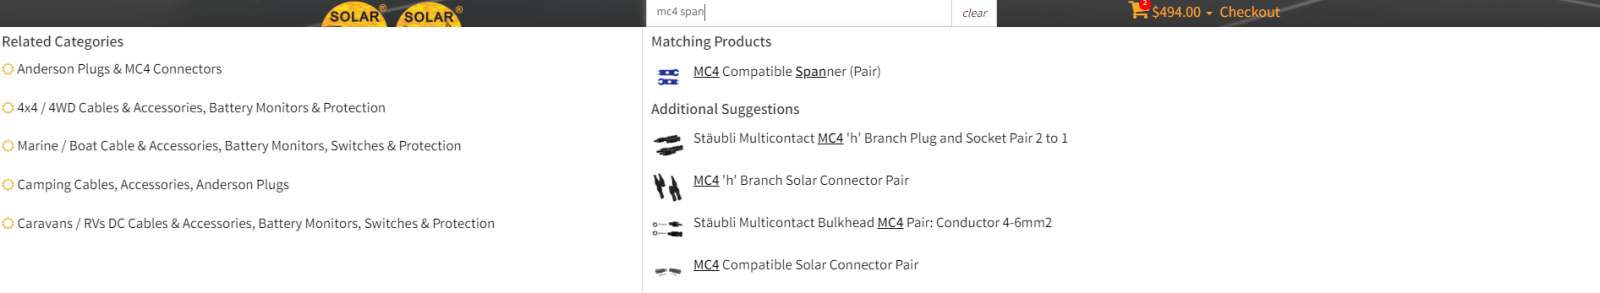 Solar 4 RVs New Search bar showing advanced categorisation feature and fuzzy search